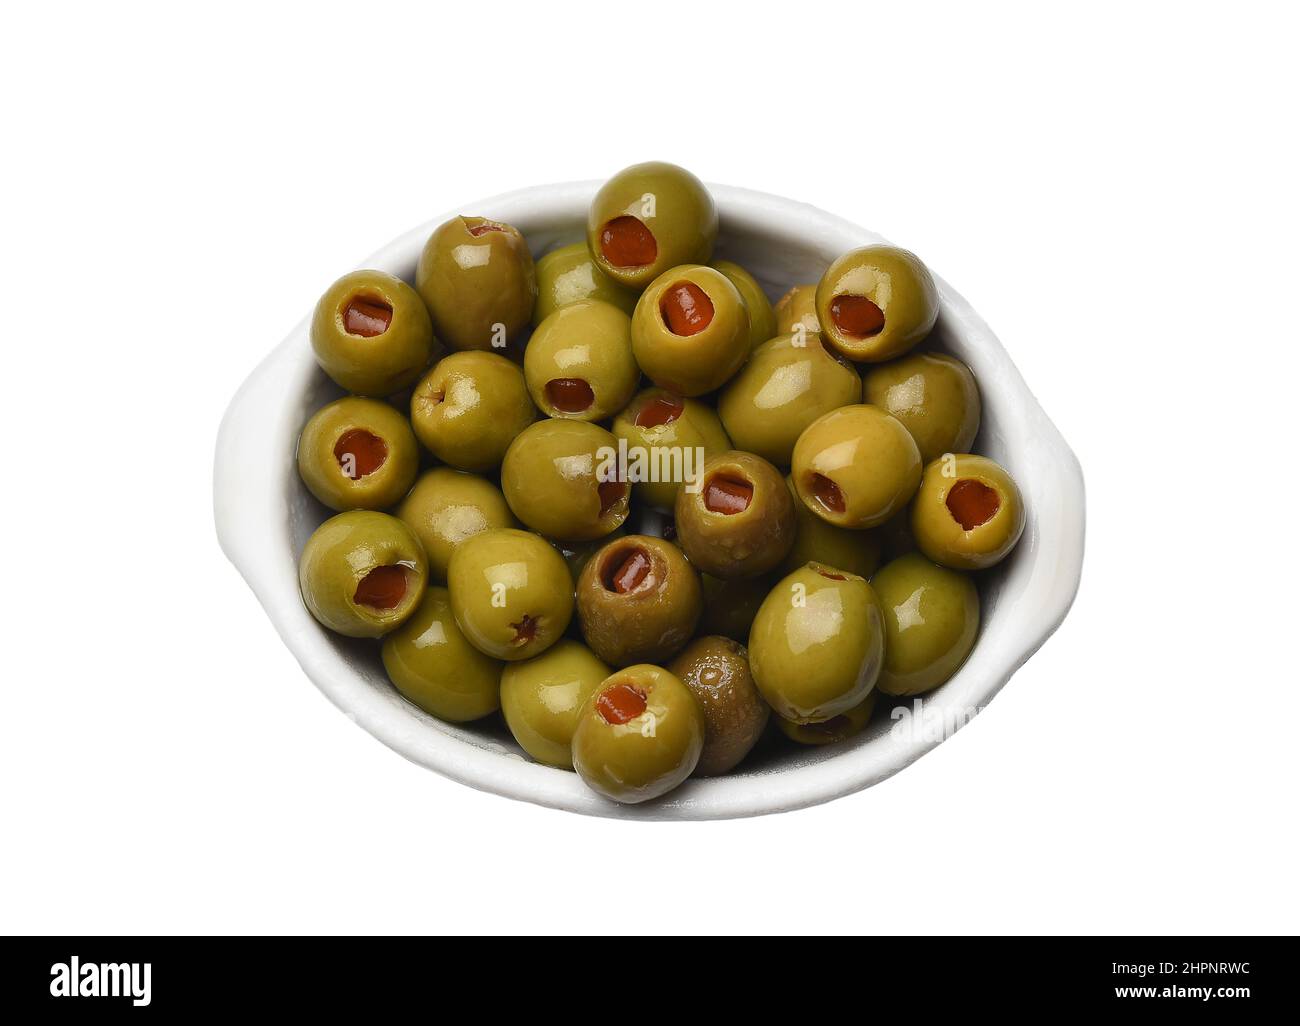 A relish dish filled with green olives stuffed with pimento Stock Photo